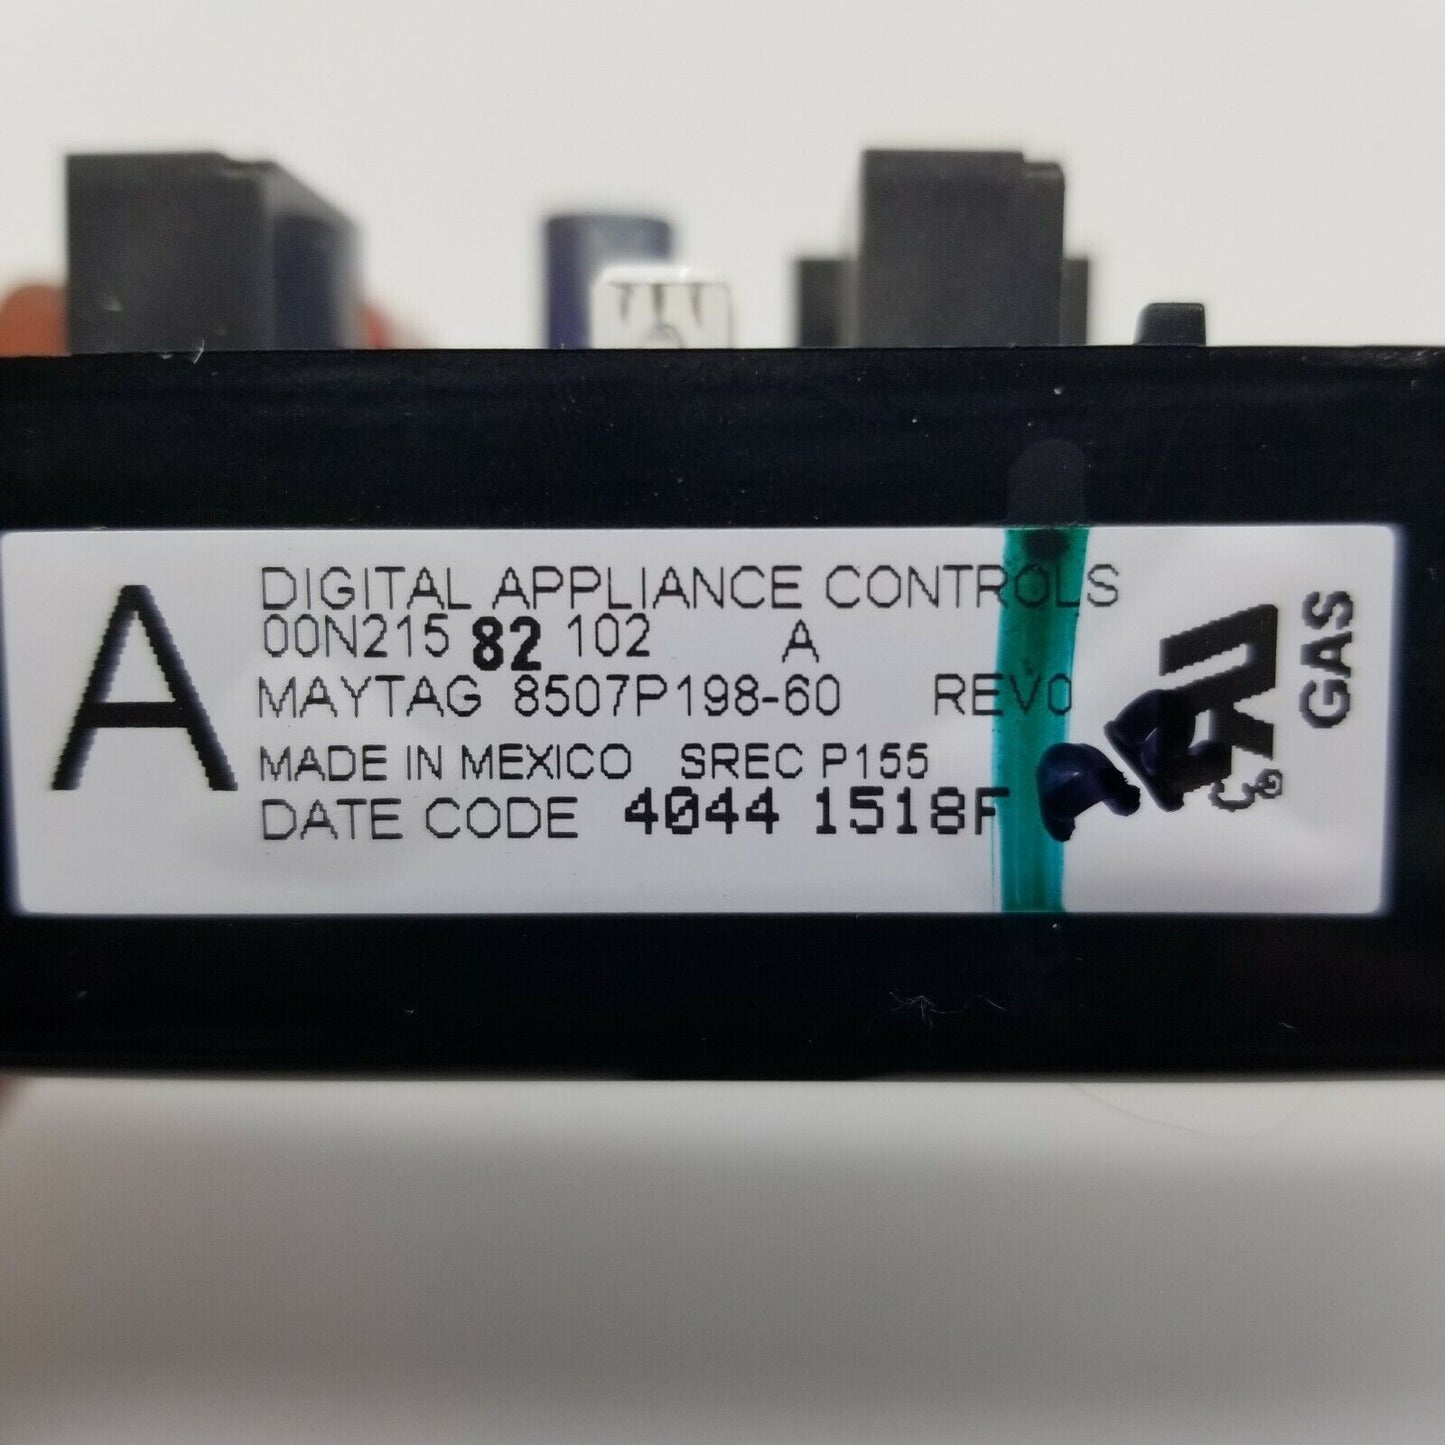 Genuine OEM Replacement for Maytag Range Control 8507P198-60